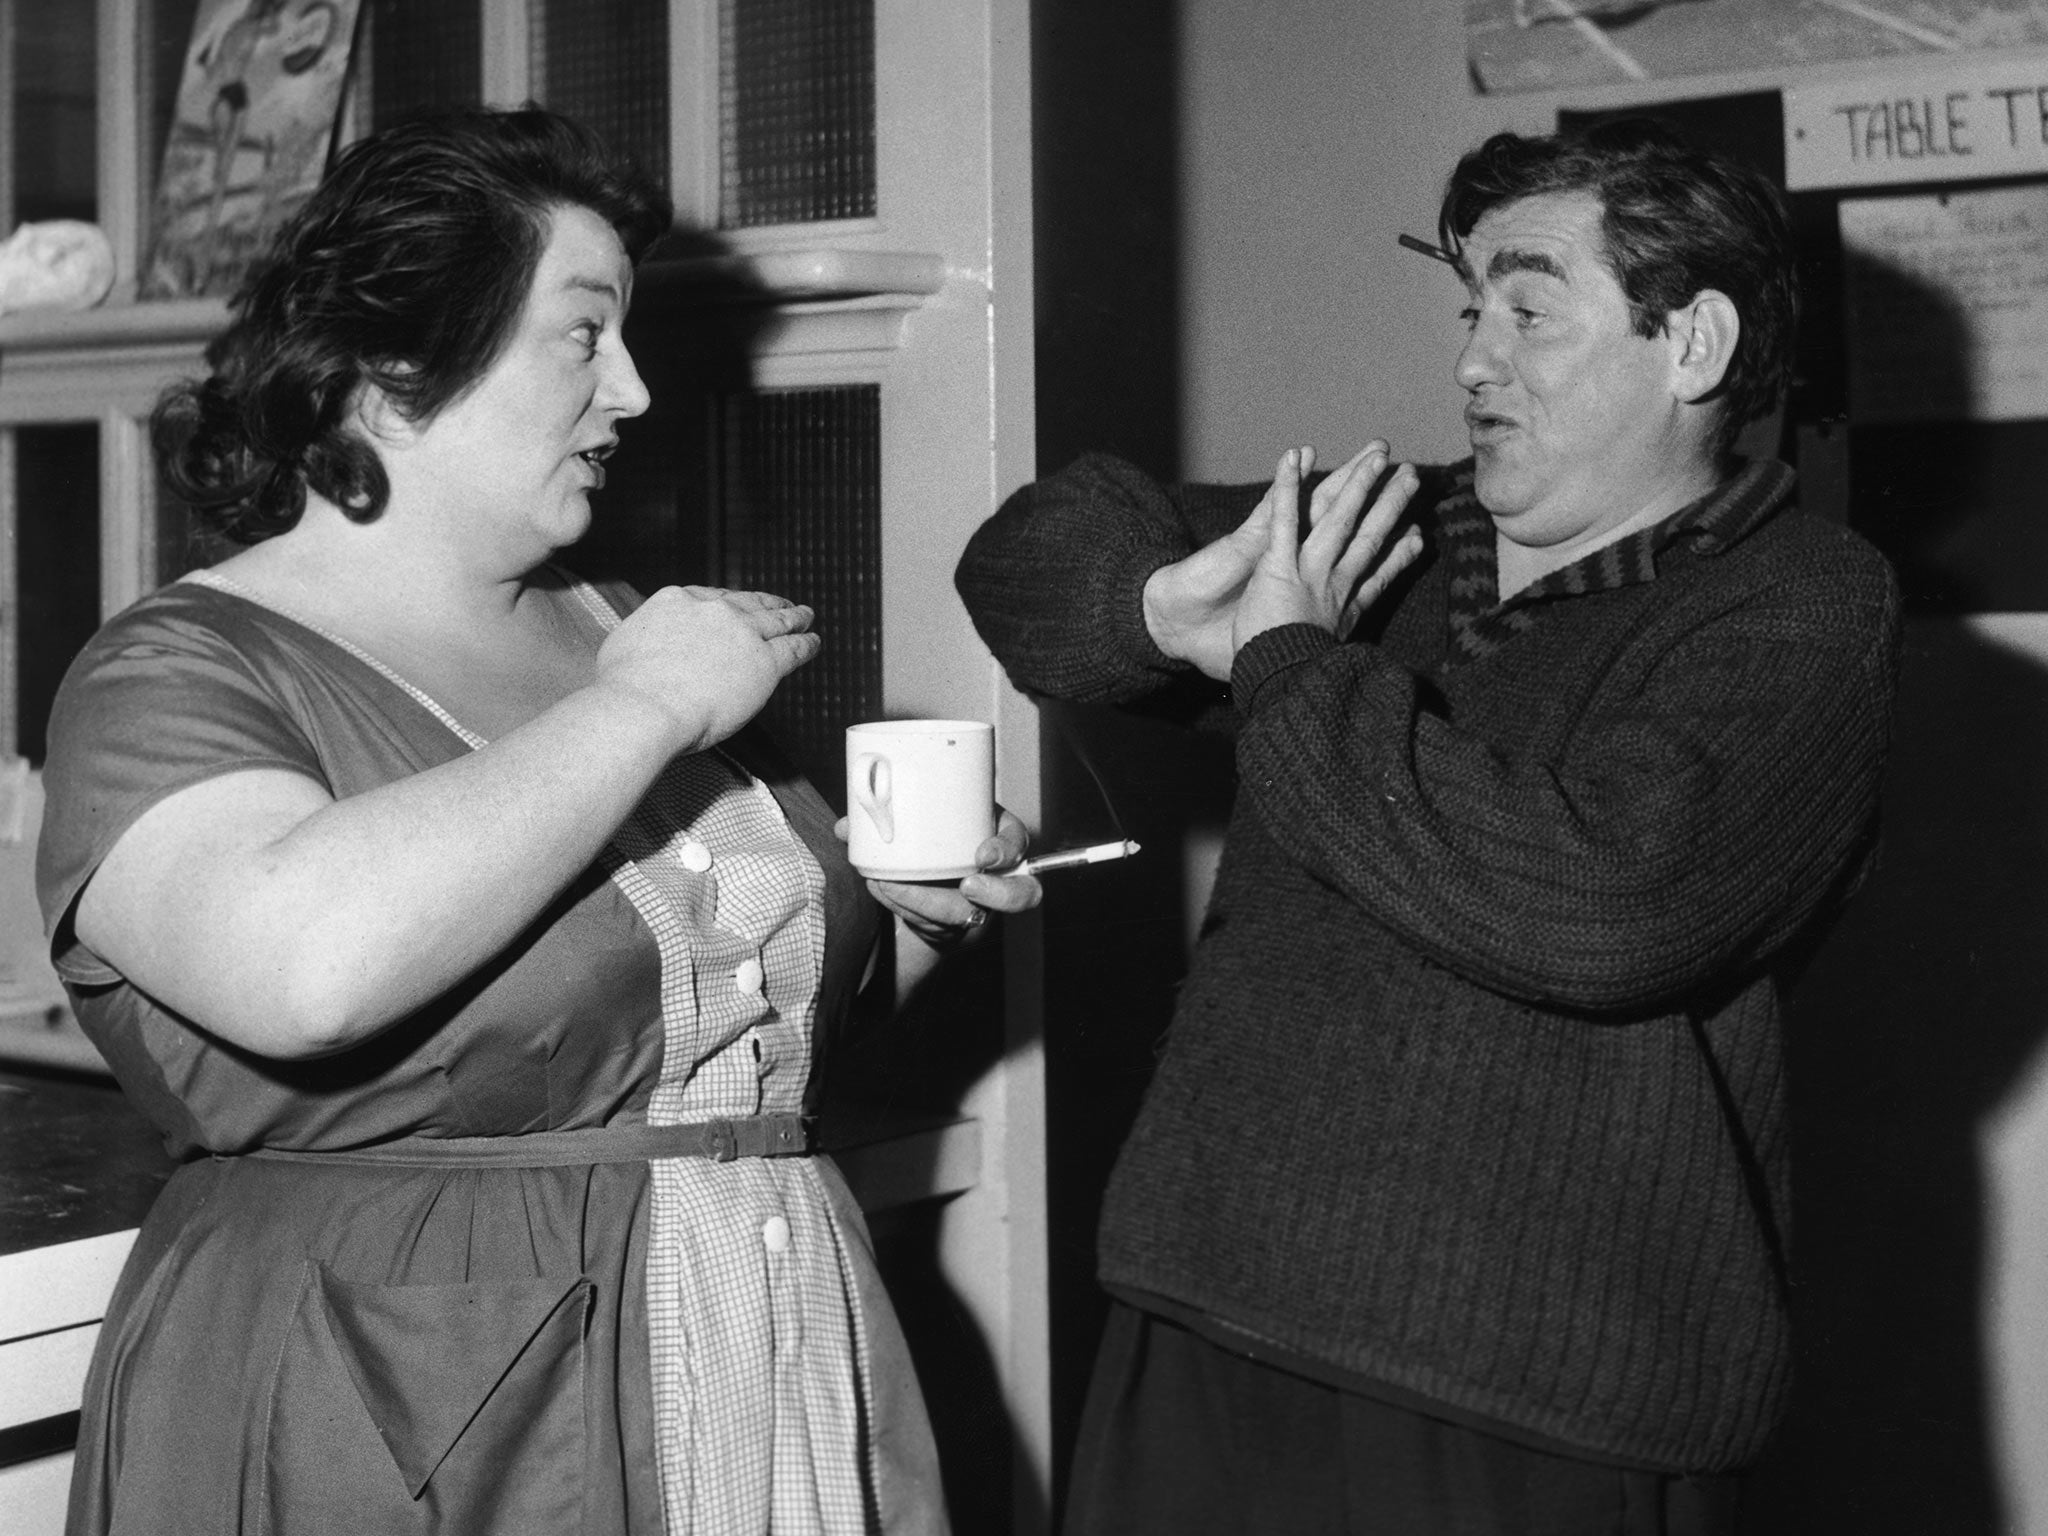 Tony Hancock jokes with Hattie Jacques during rehearsals for ‘Hancock’s Half Hour’ in 1959